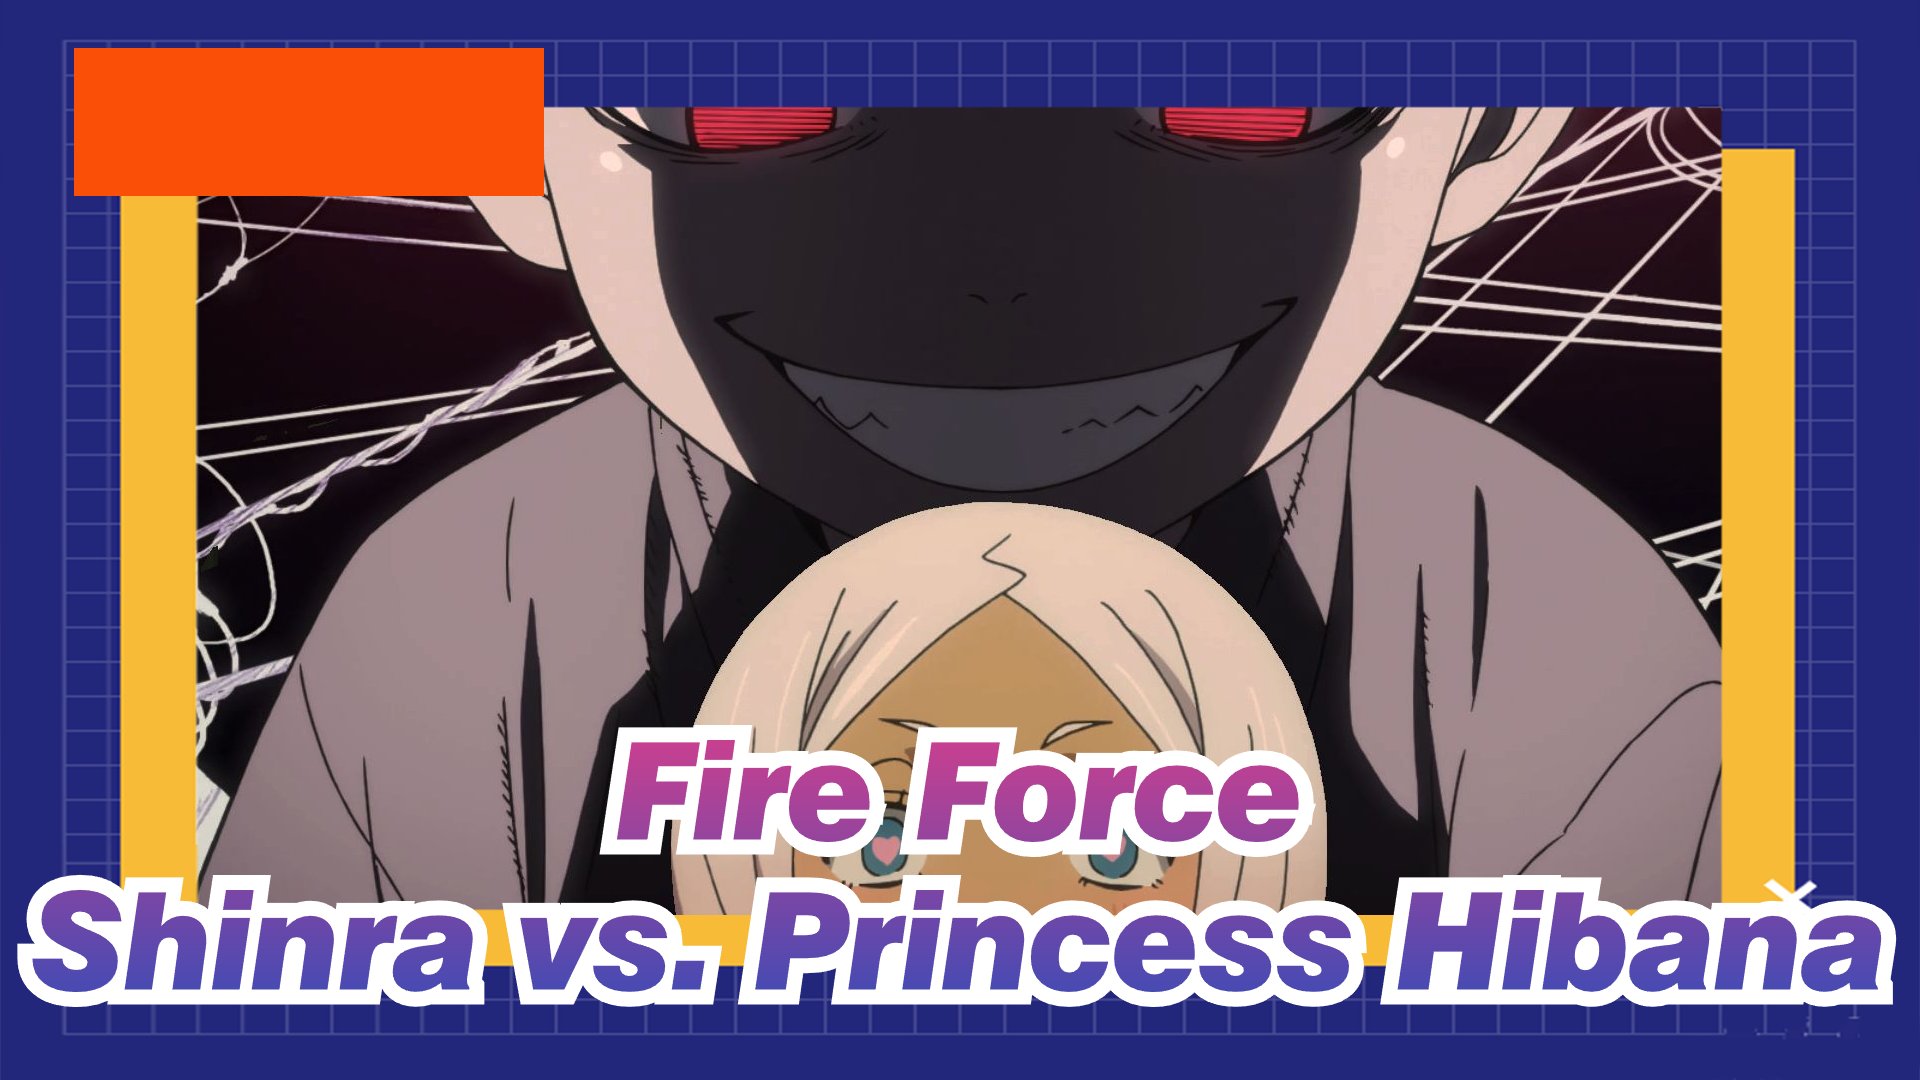 Fire Force Shinra VS Princess Hibana, this is the last part, there is